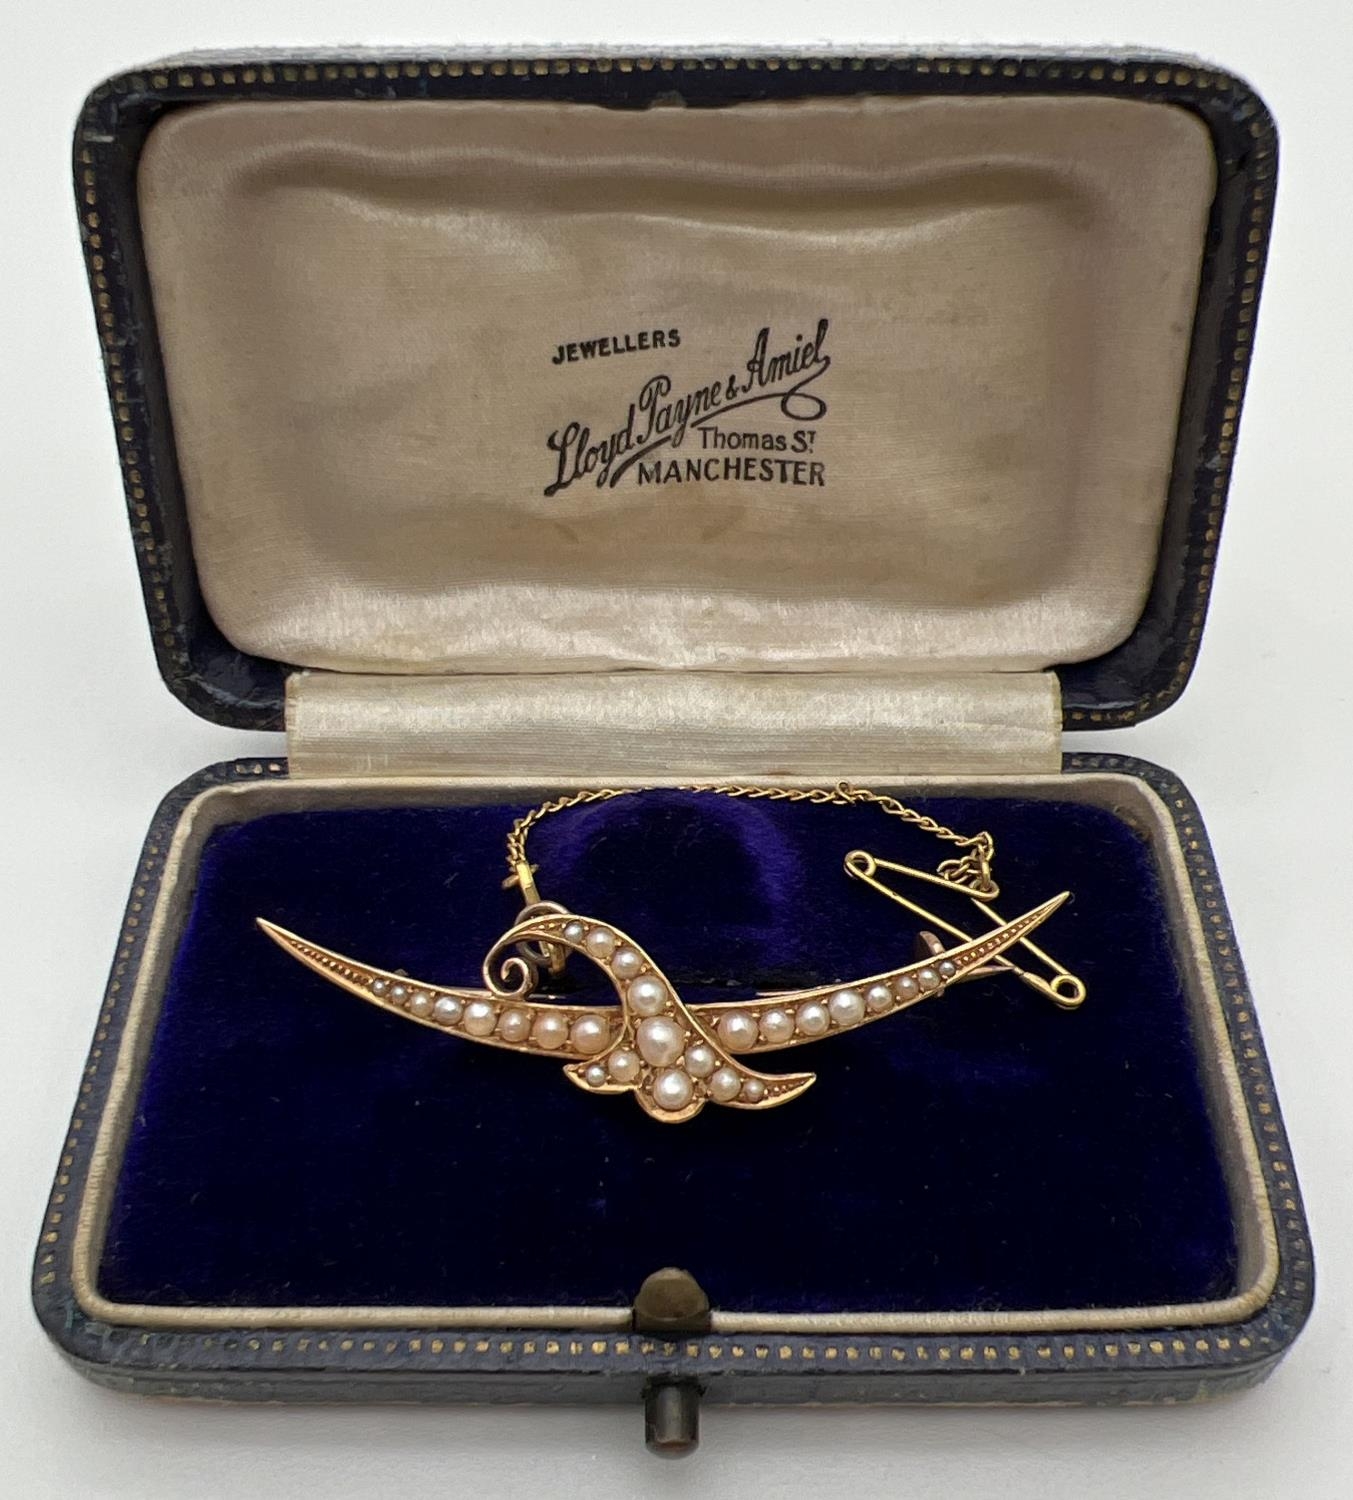 An Edwardian 15ct gold and seed pearl brooch in original box by Lloyd Payne & Amiel, Manchester. - Image 3 of 4